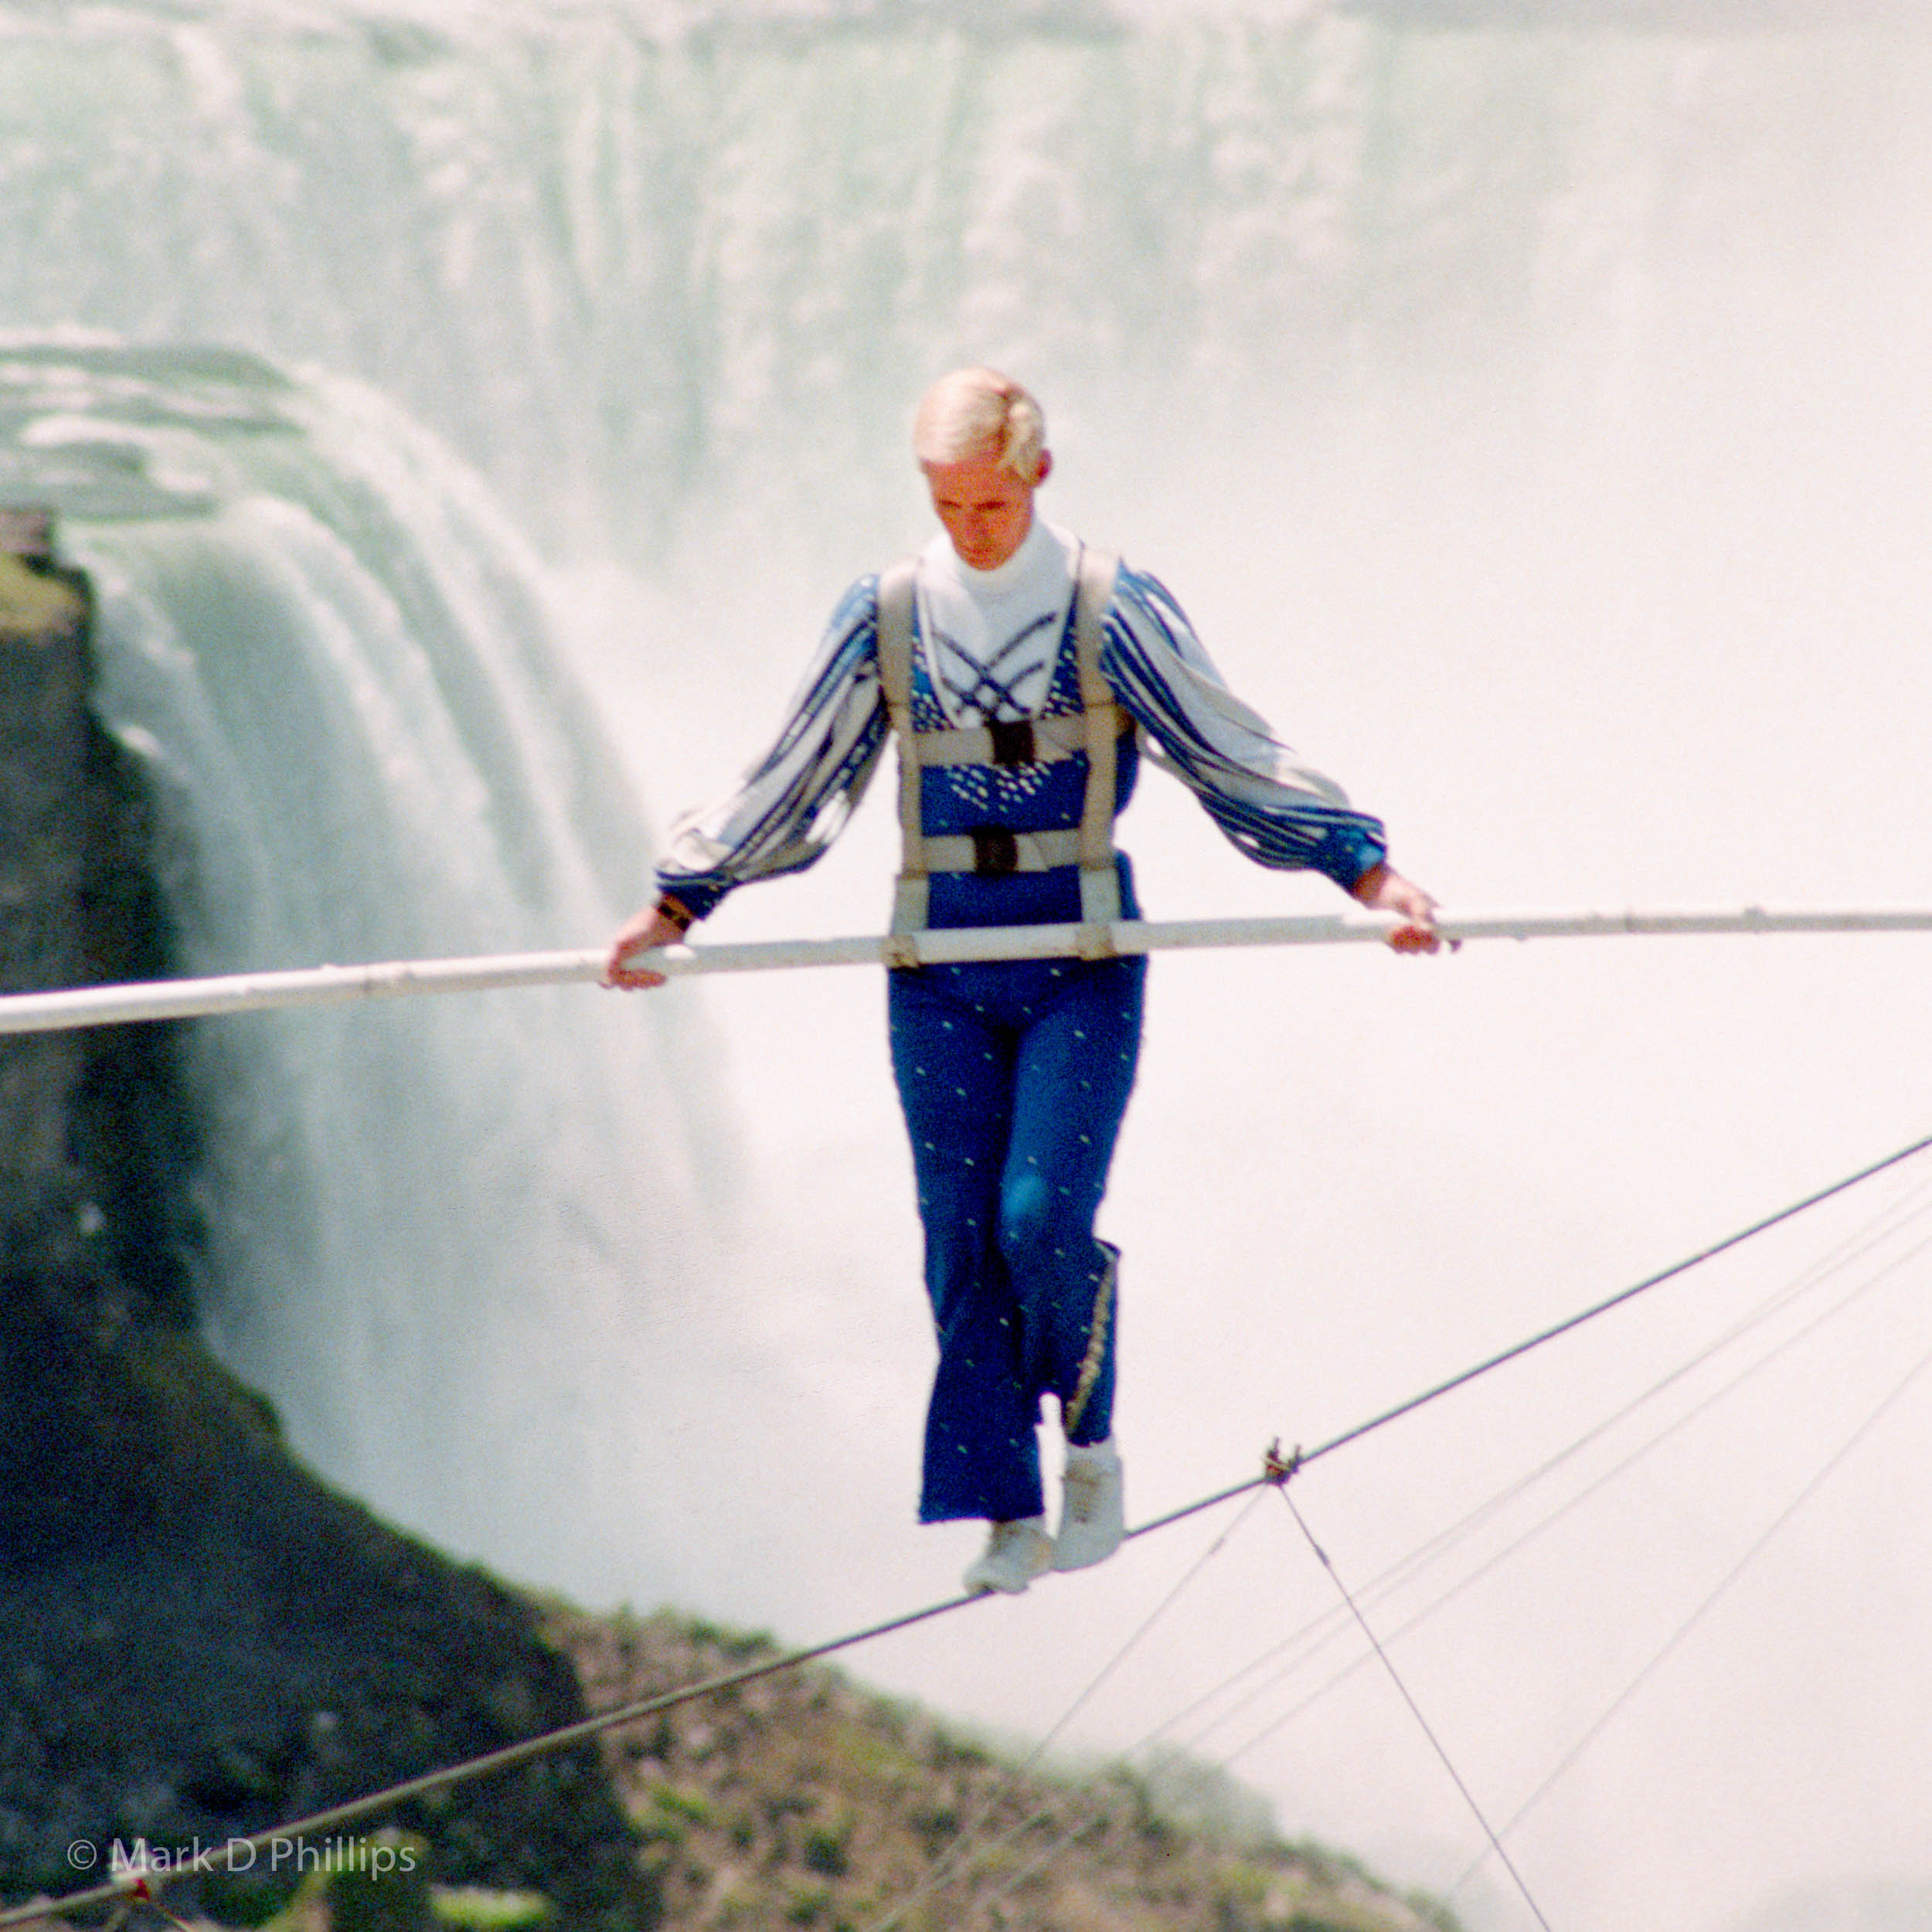 In 2002 Jay Cochrane completed the first skywalk in over a hundred years in Niagara Falls, Canada. The skywalk went from the pinnacle of the Sheraton on the Falls Hotel to the Casino Niagara Tower at a height of 40 stories, with Niagara Falls as the backdrop. "Skywalk at Niagara" was the highest skywalk ever completed in Niagara Falls. ©Mark D Phillips